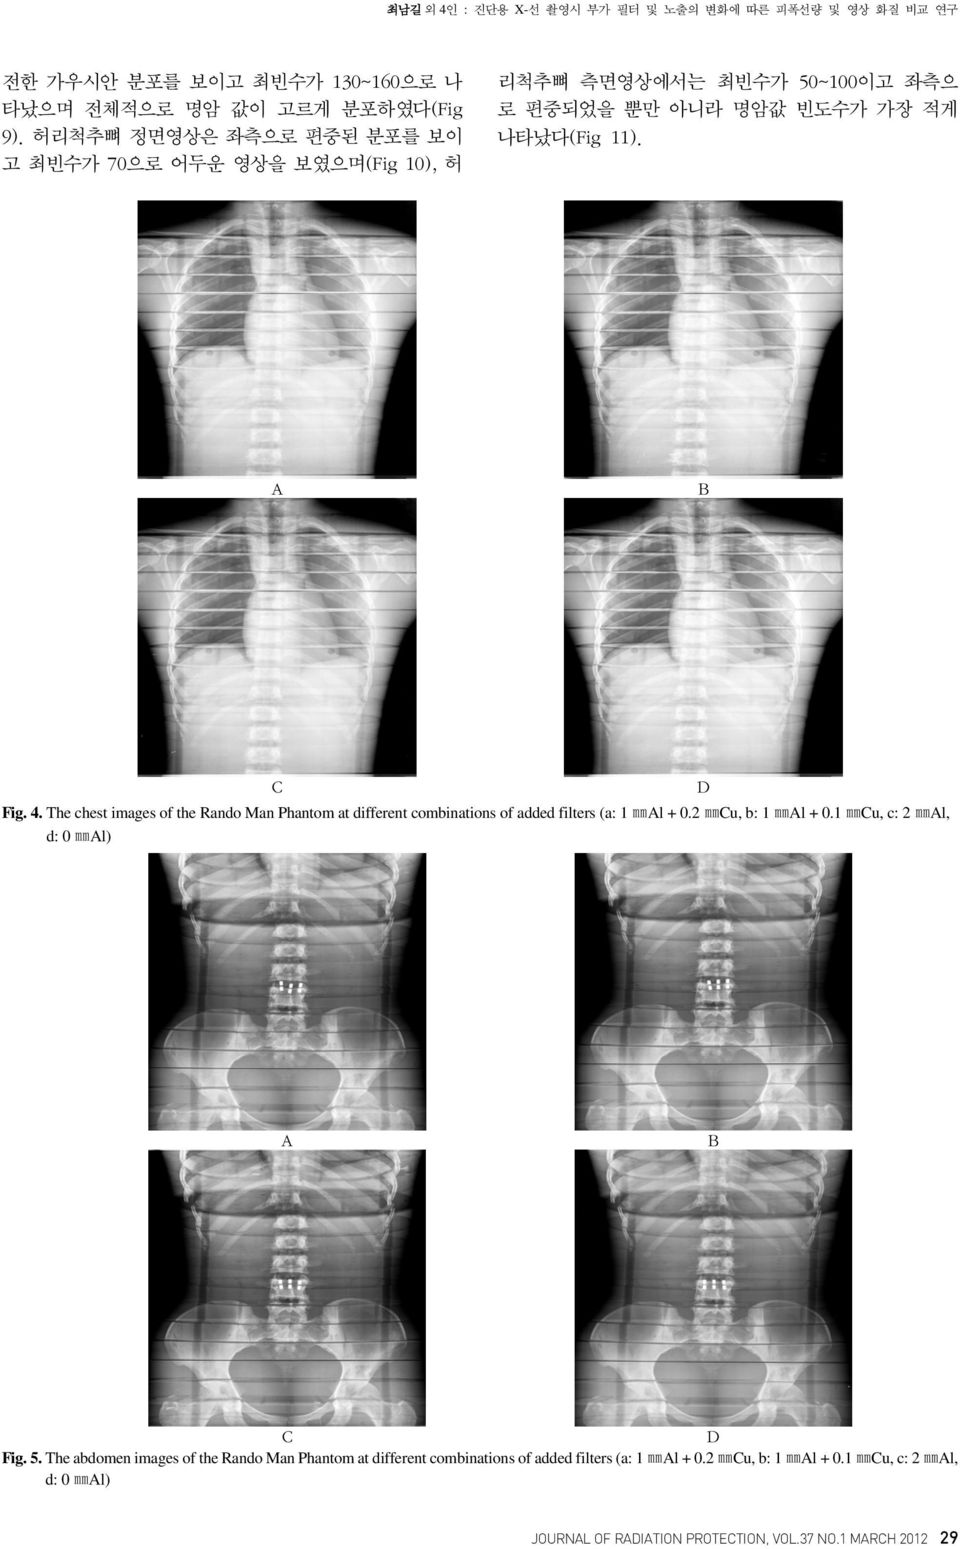 4. The chest images of the Rando Man Phantom at different combinations of added filters (a: 1 mml + 0.2 mmcu, b: 1 mml + 0.